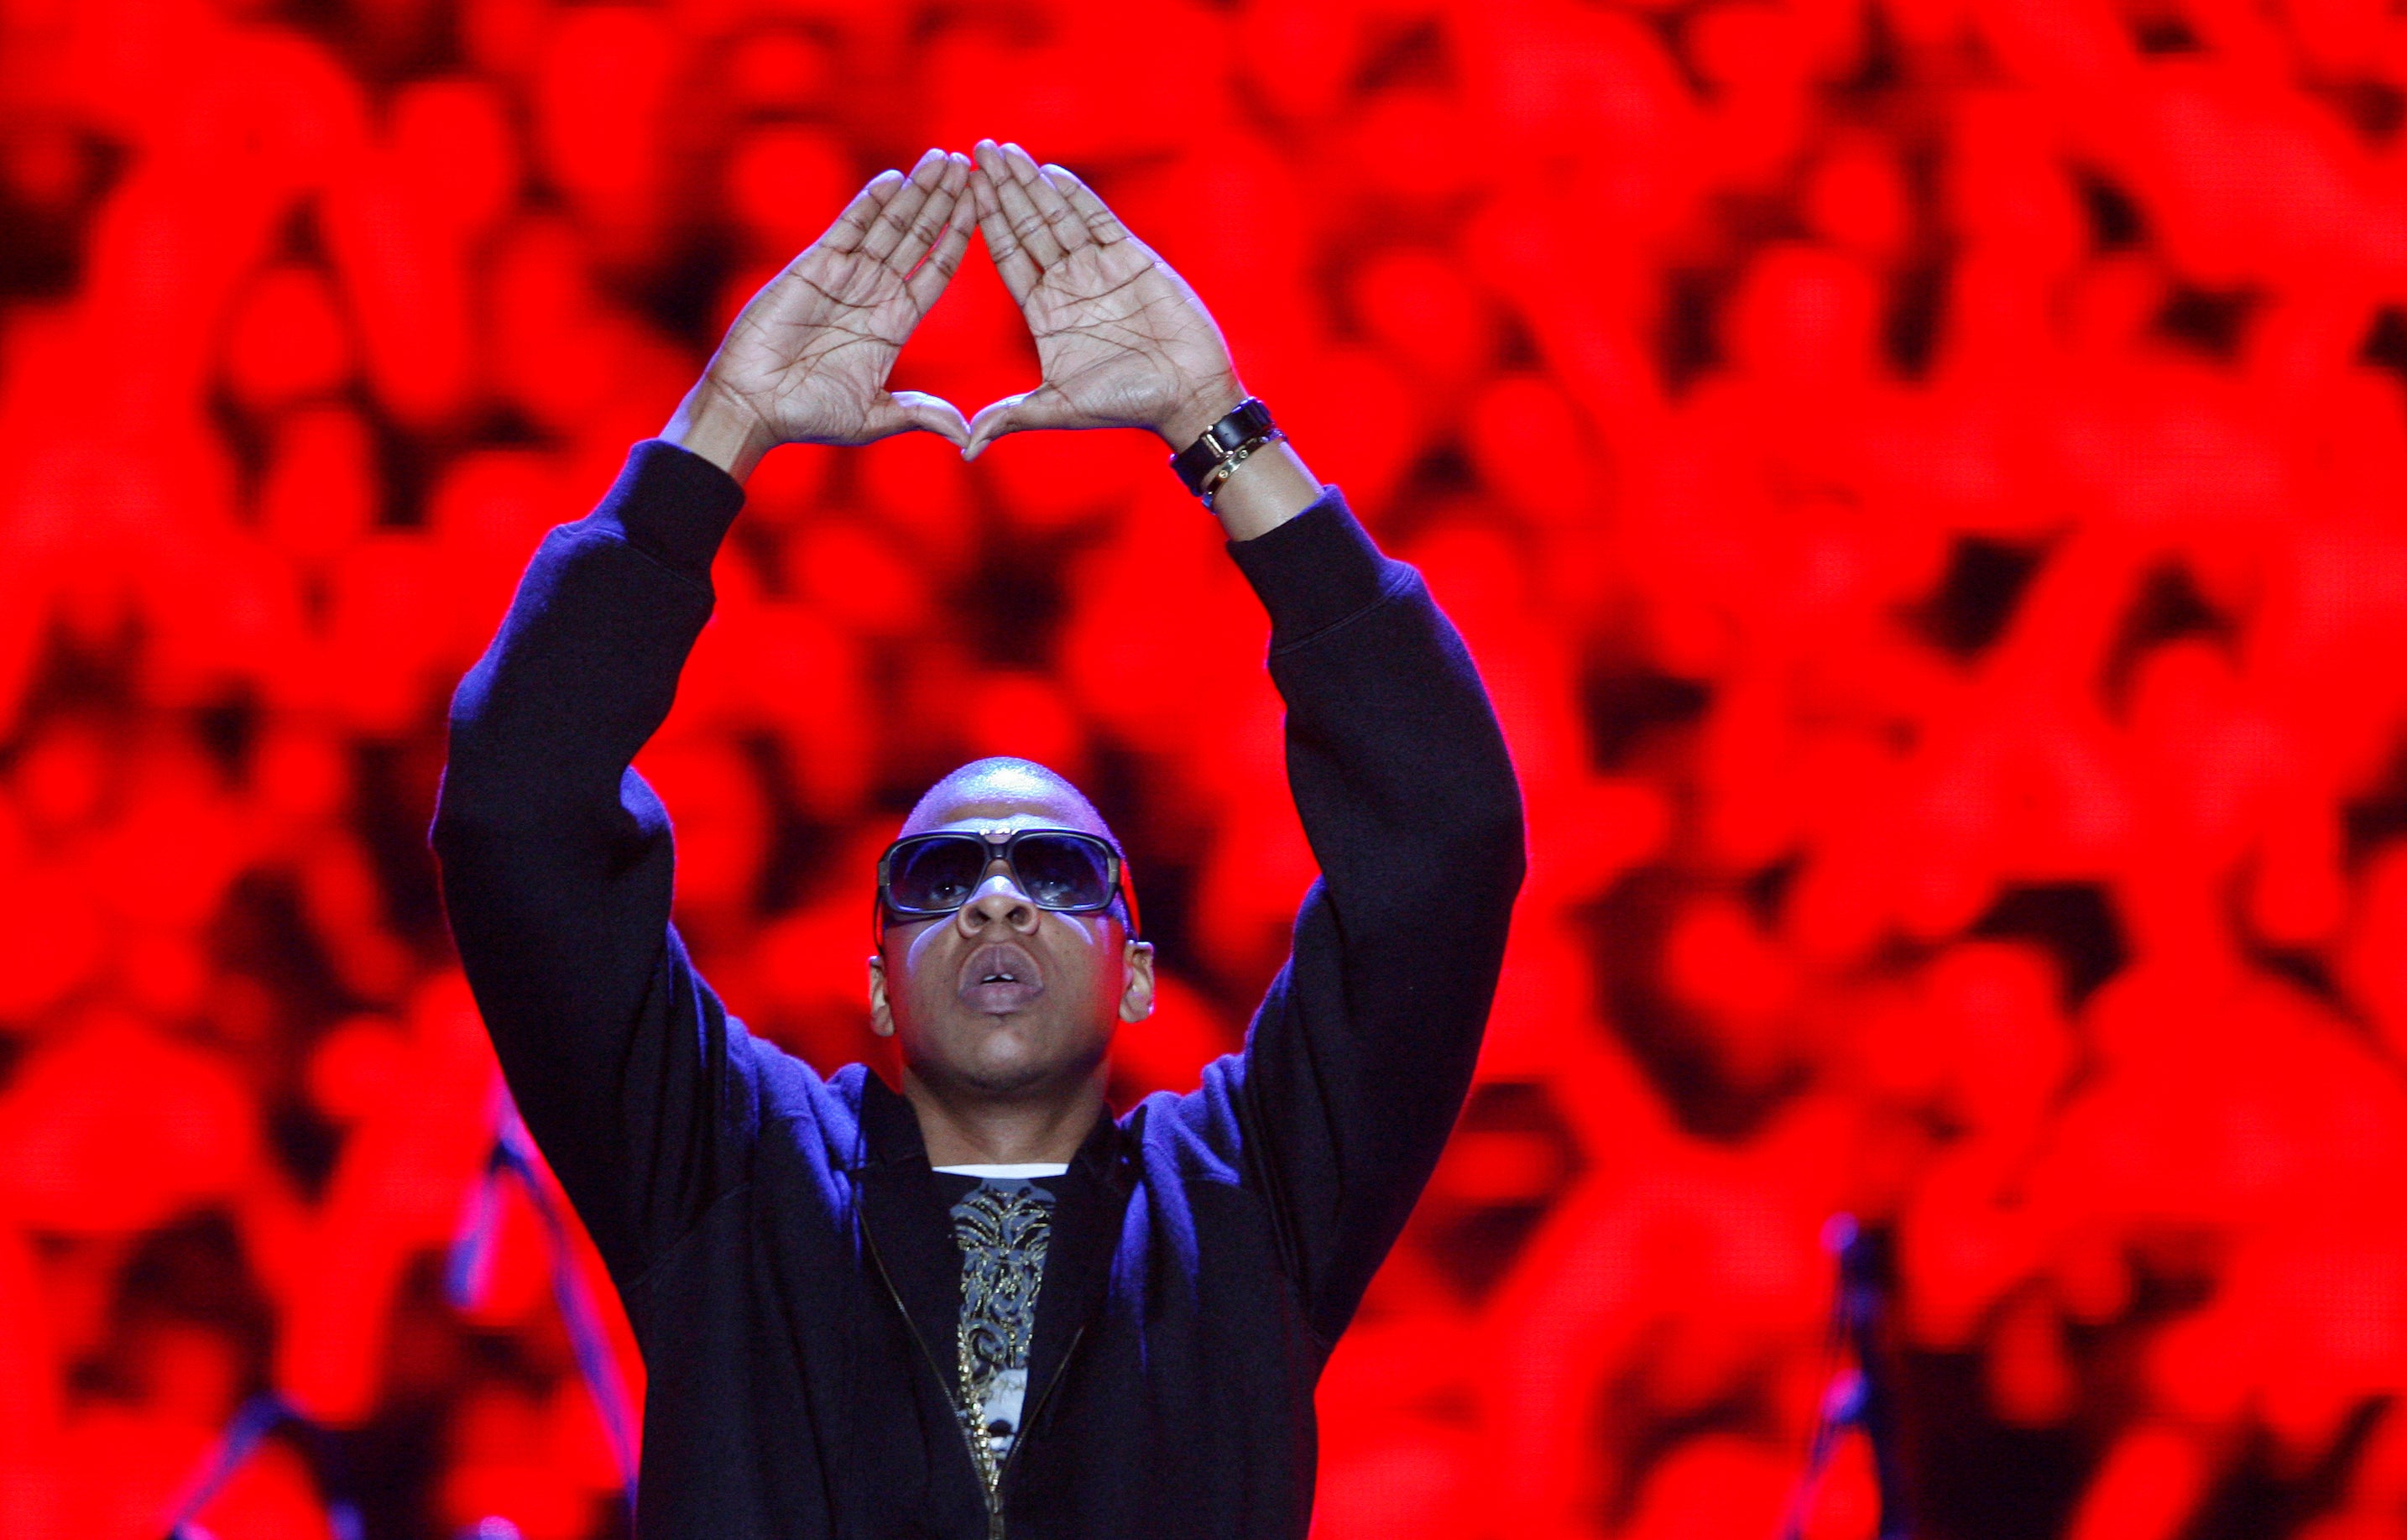 American rapper Jay-Z performs during the Heineken Open'er Festival in Gdynia, northern Poland, July 5, 2008. Picture taken July 5, 2008. REUTERS/Kacper Pempel (POLAND)